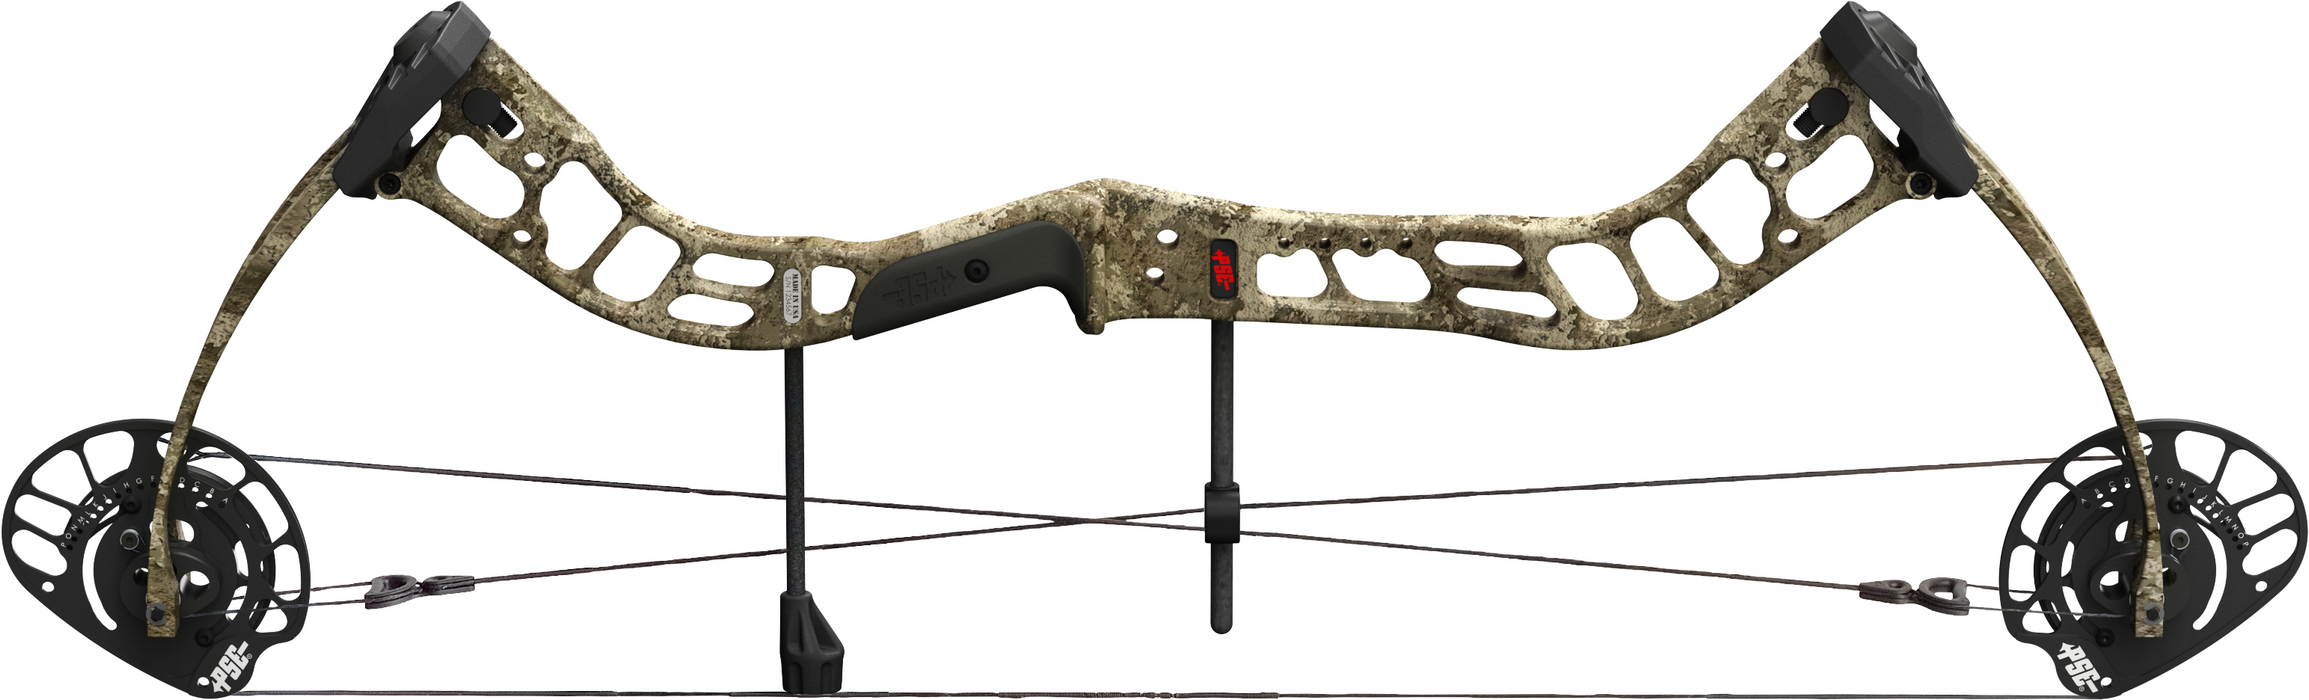 PSE Brute ATK Series Bow Package 70lbs Hunter Package - Right Hand